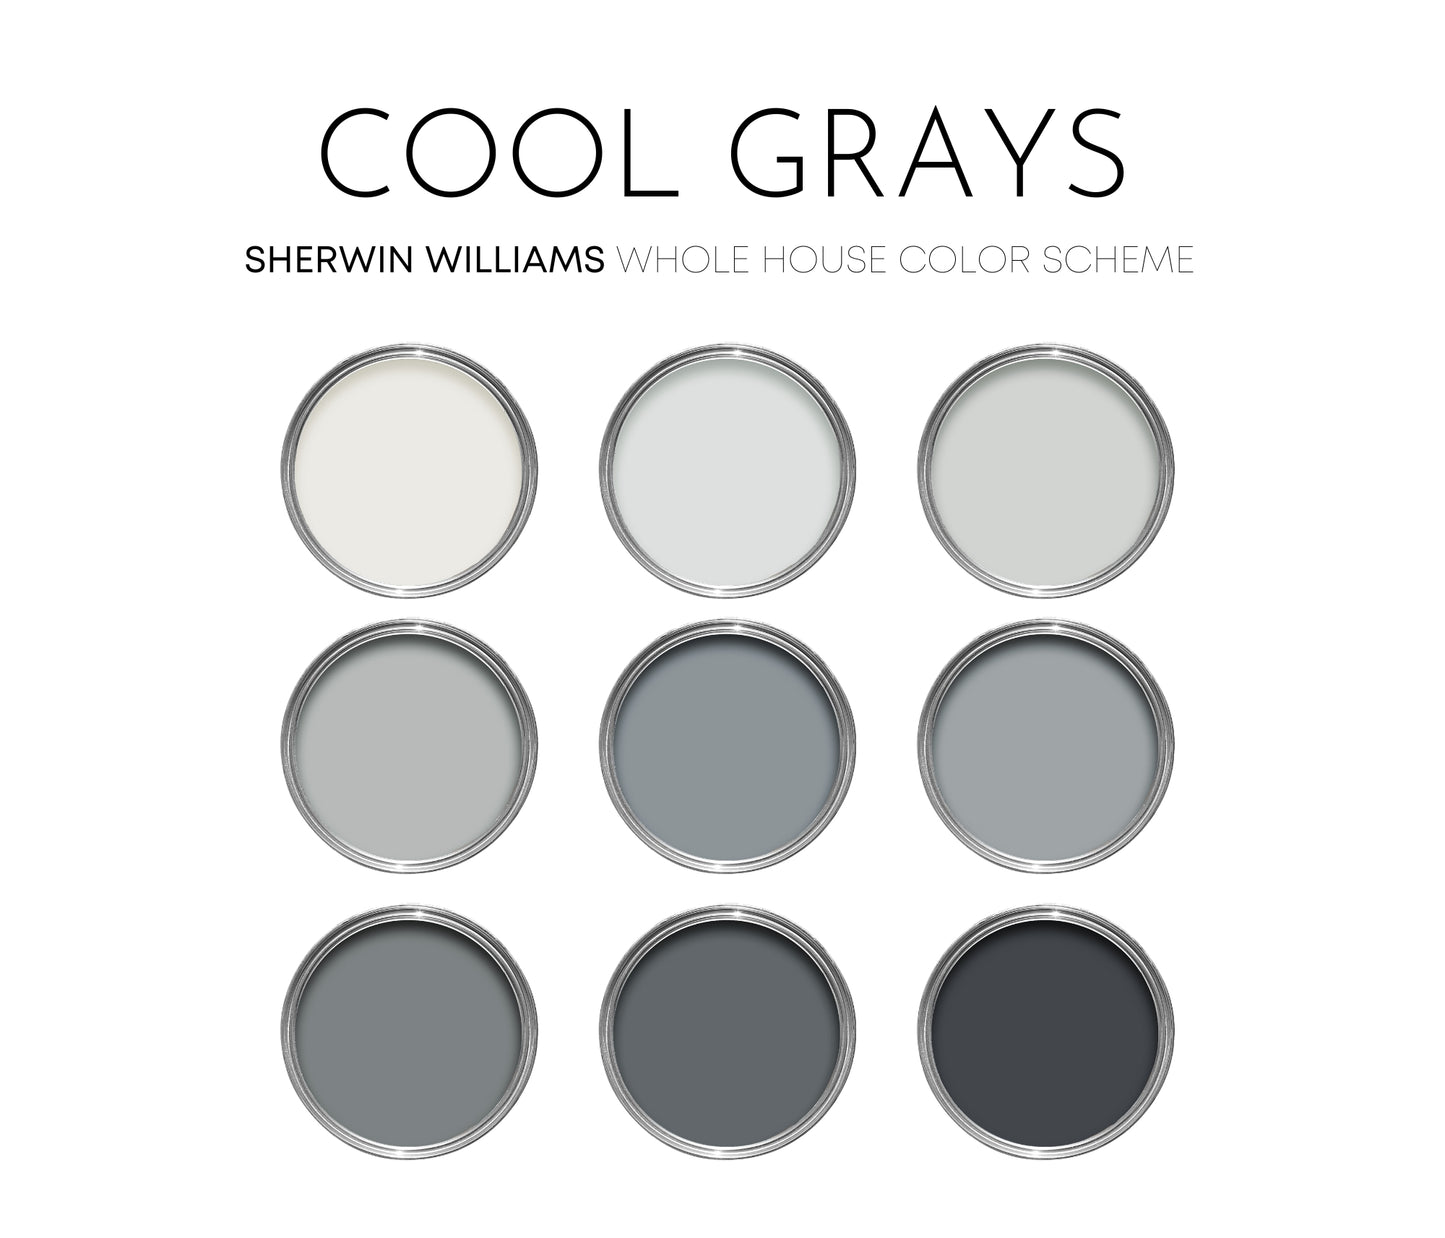 Cool Grays Sherwin Williams Paint Palette, Interior Paint Colors for Home, Cool Grays, Coastal Colors, Modern Neutrals, Pure White